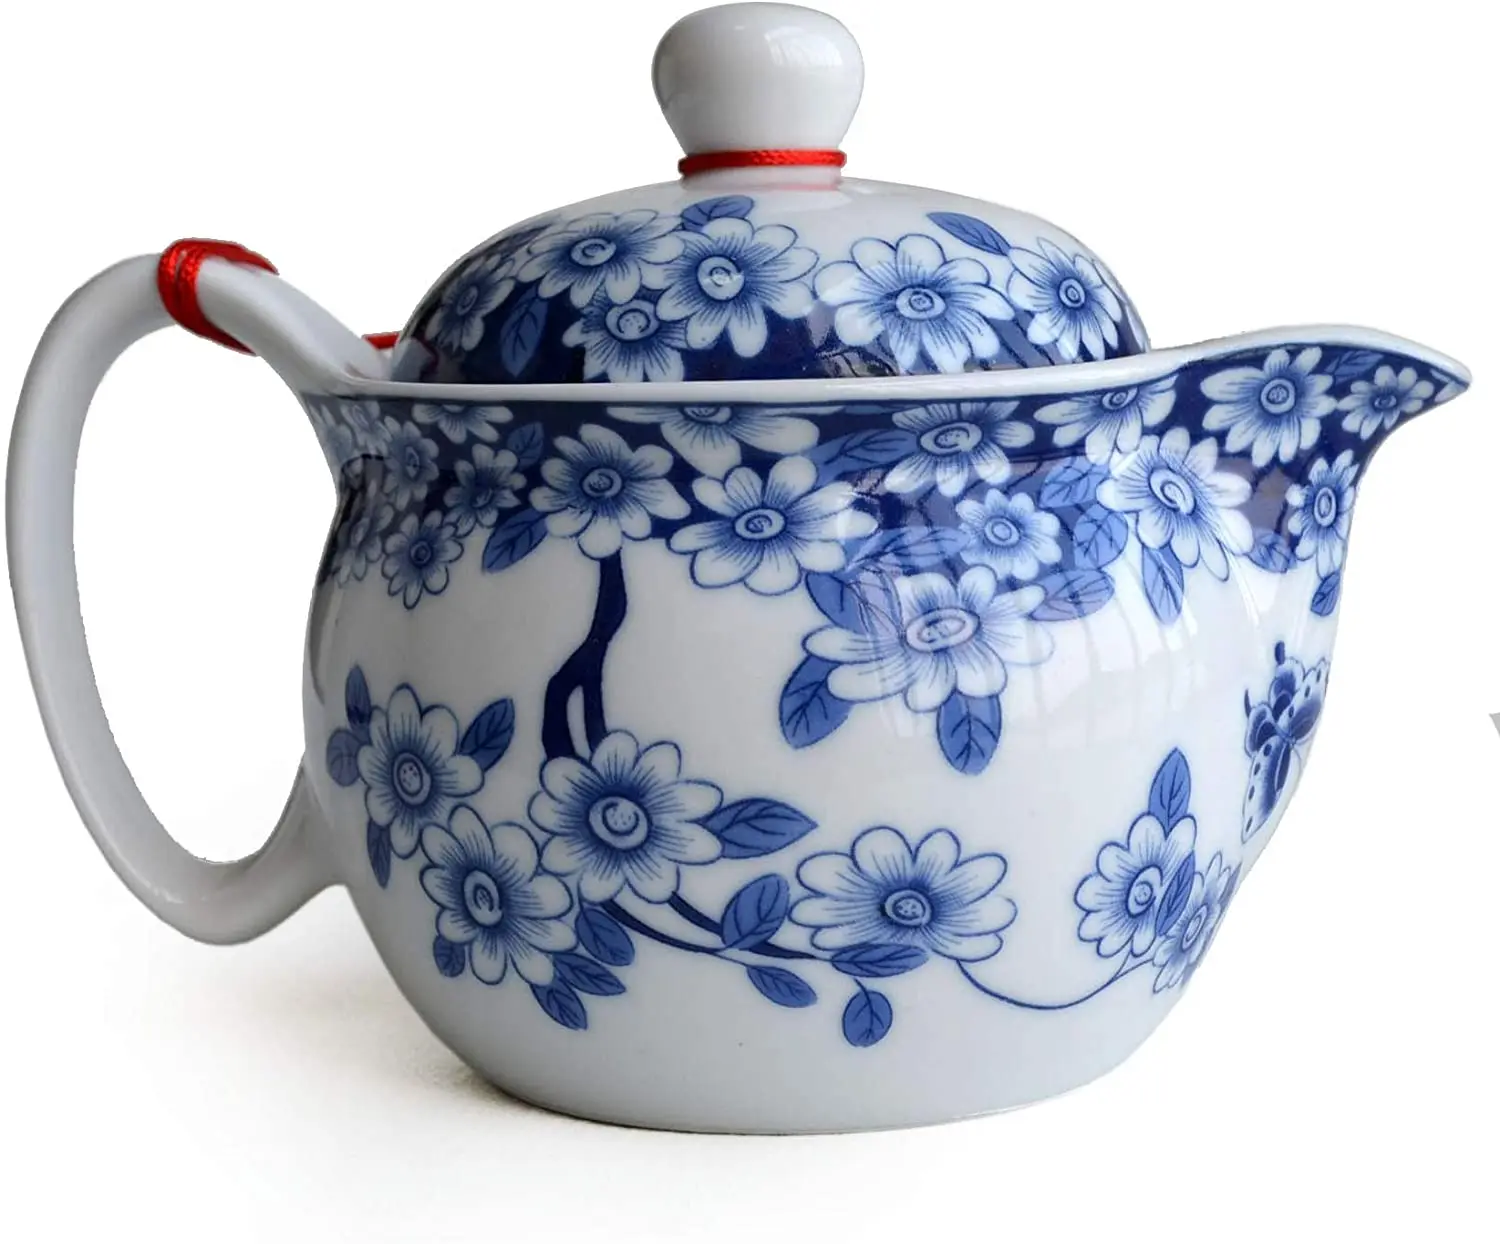 

Teapot 350ml porcelain blue white Chinese pot stainless steel strainer infusion Flowers tea puer kettle ceramic teaware Home